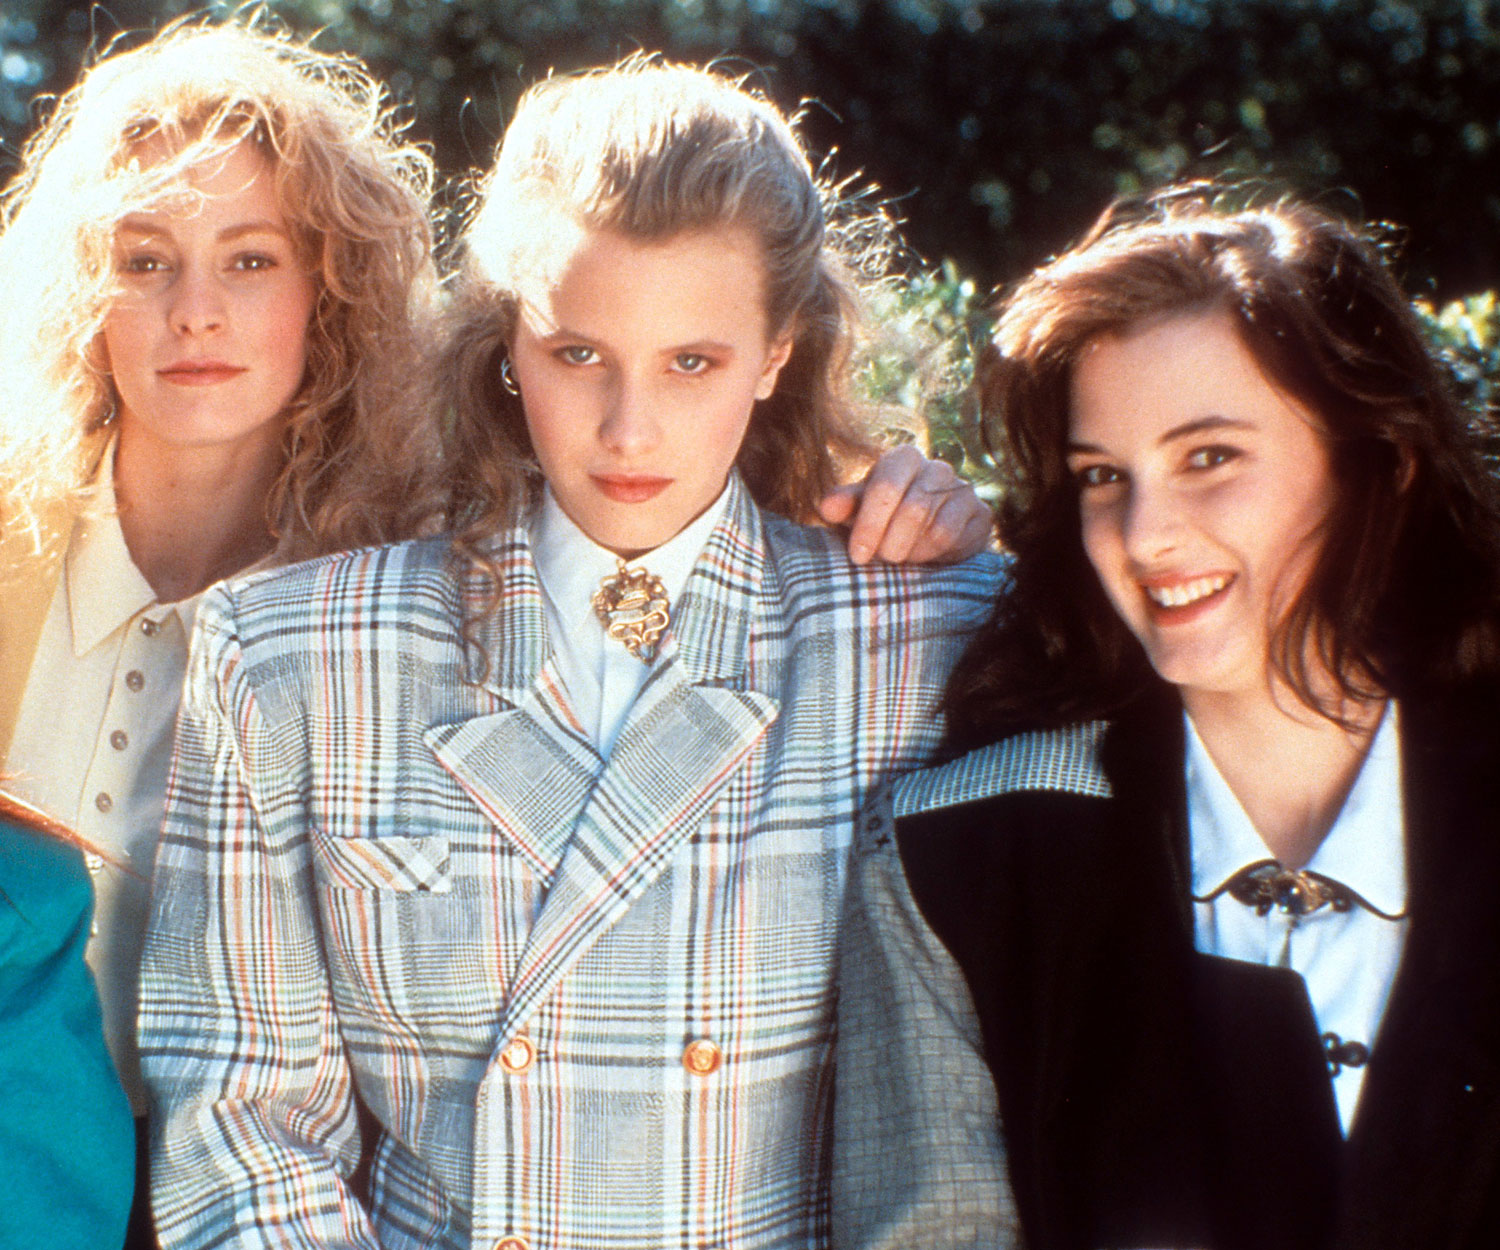 The cast of Heathers: Where are they now?